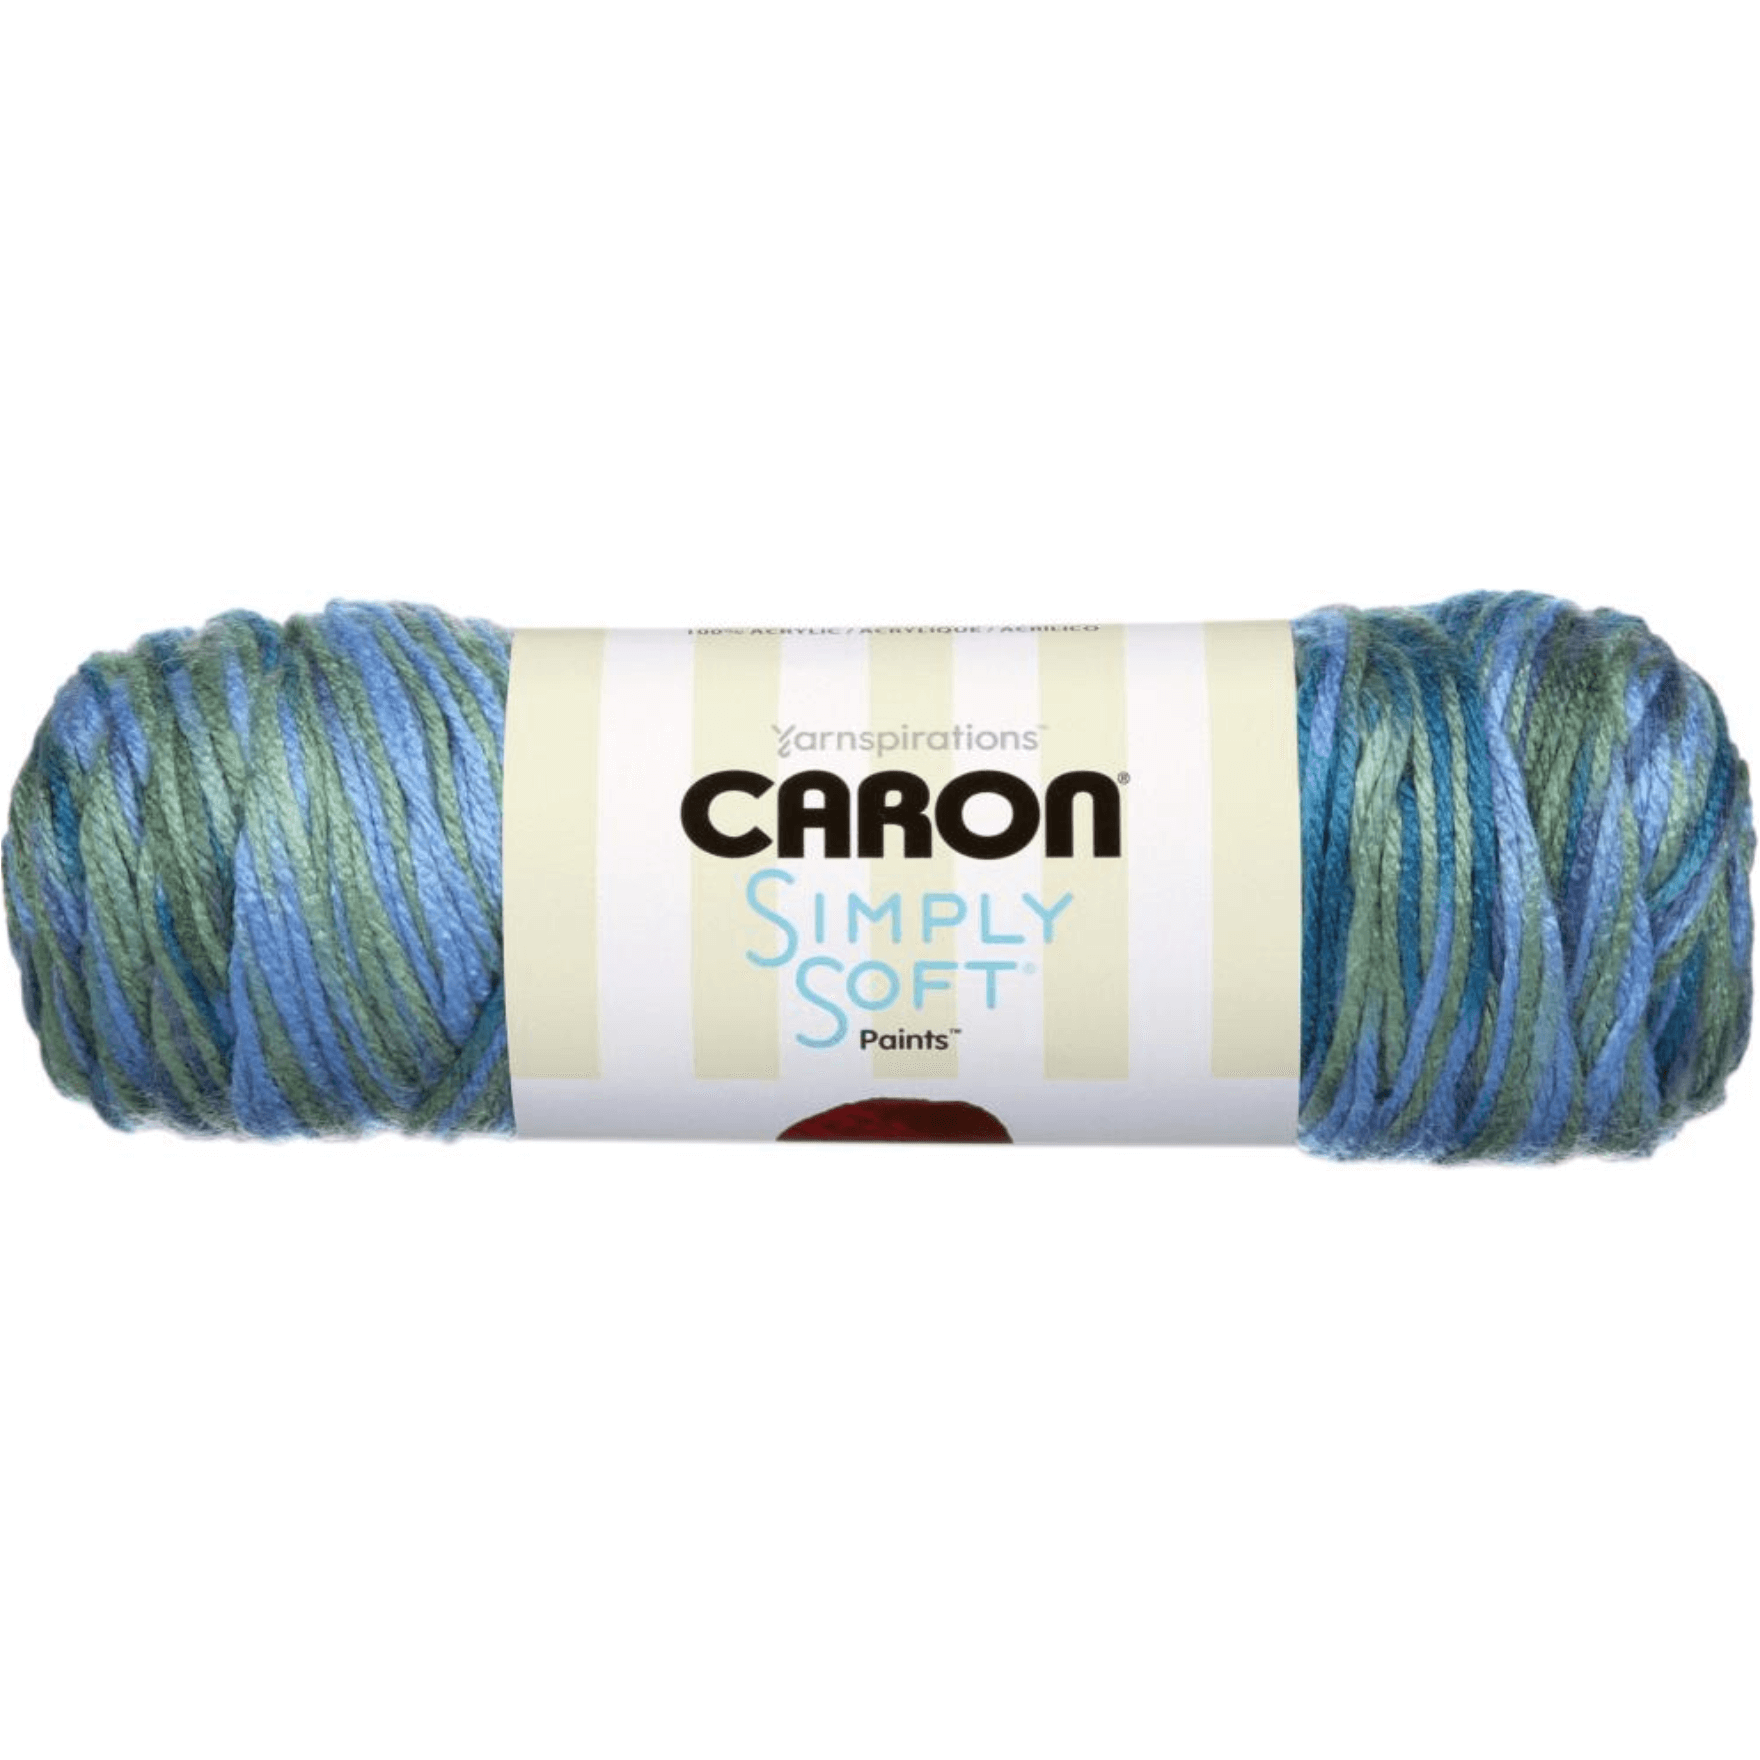 Caron Simply Soft Paints Yarn Sold As A 3 Pack